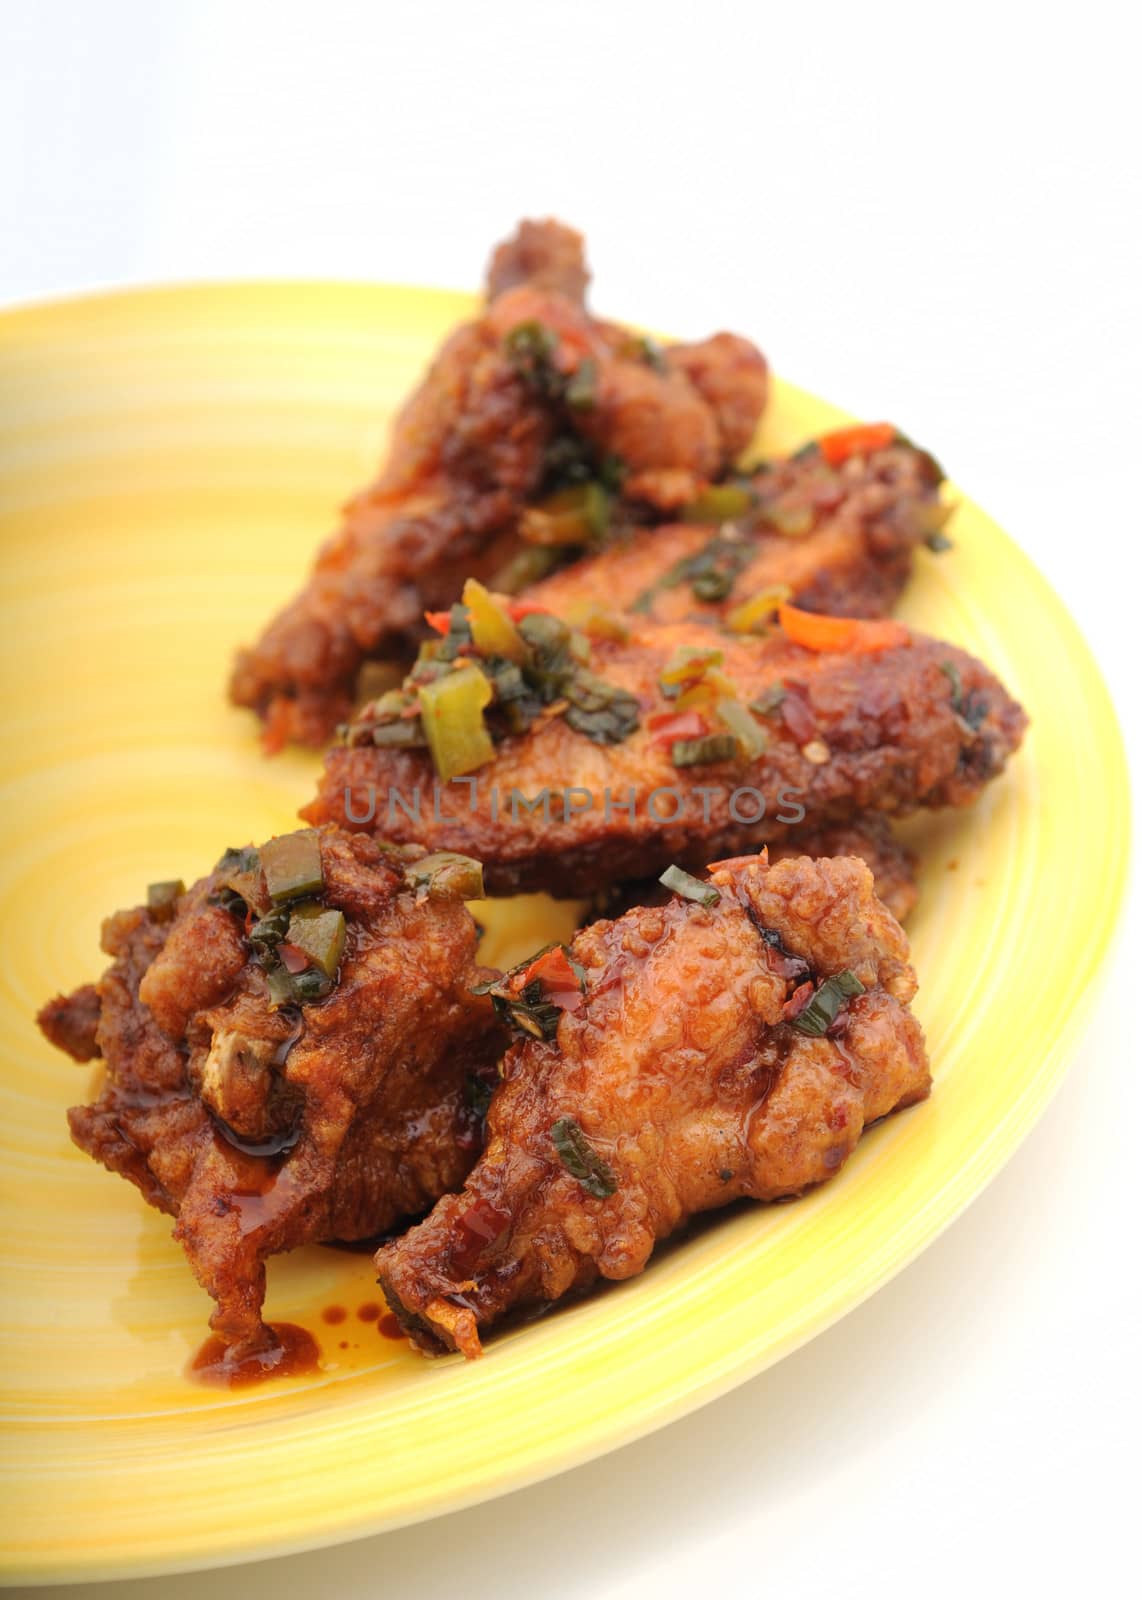 half dozen chicken wings with peppers and seasoning on yellow plate